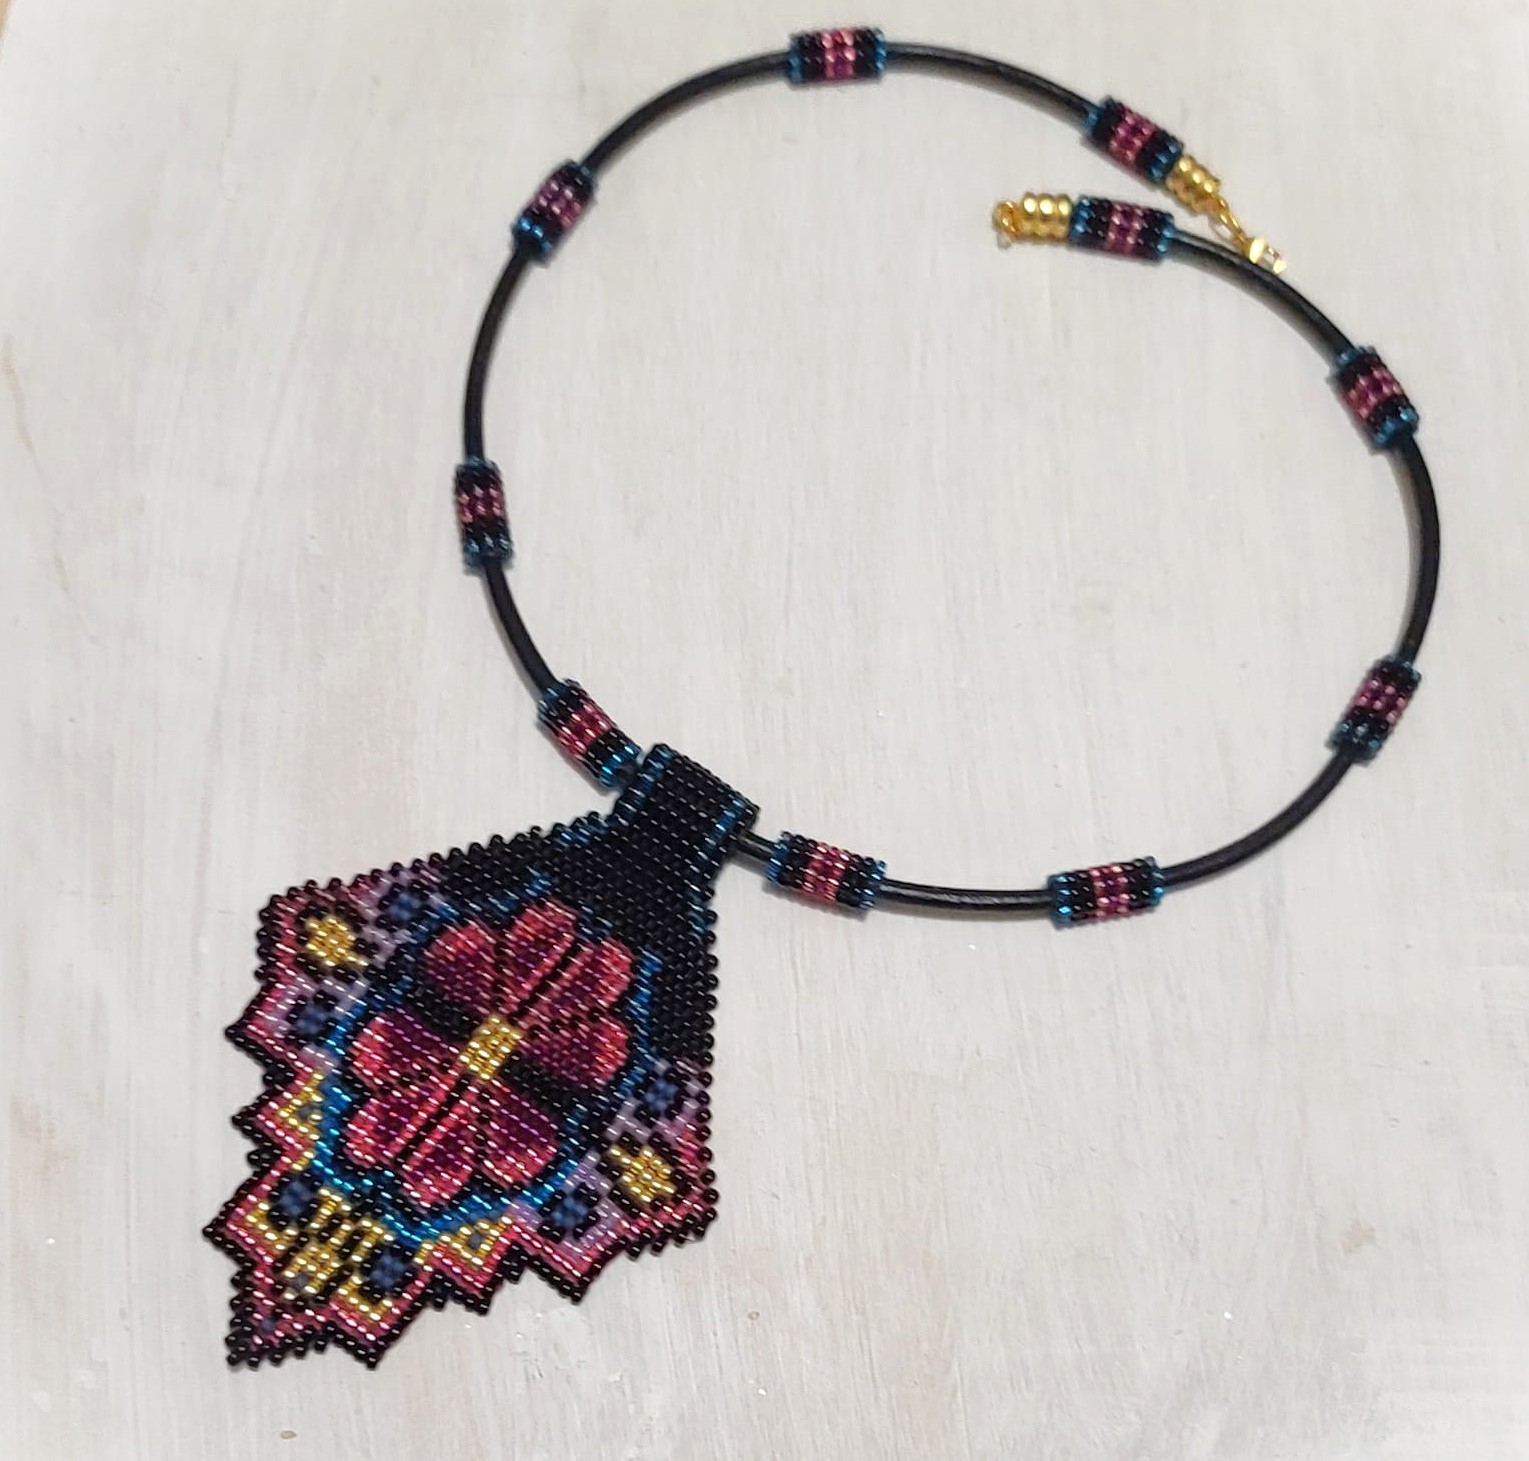 Geometric Floral Pattern Bead Weaved Necklace with Black leather